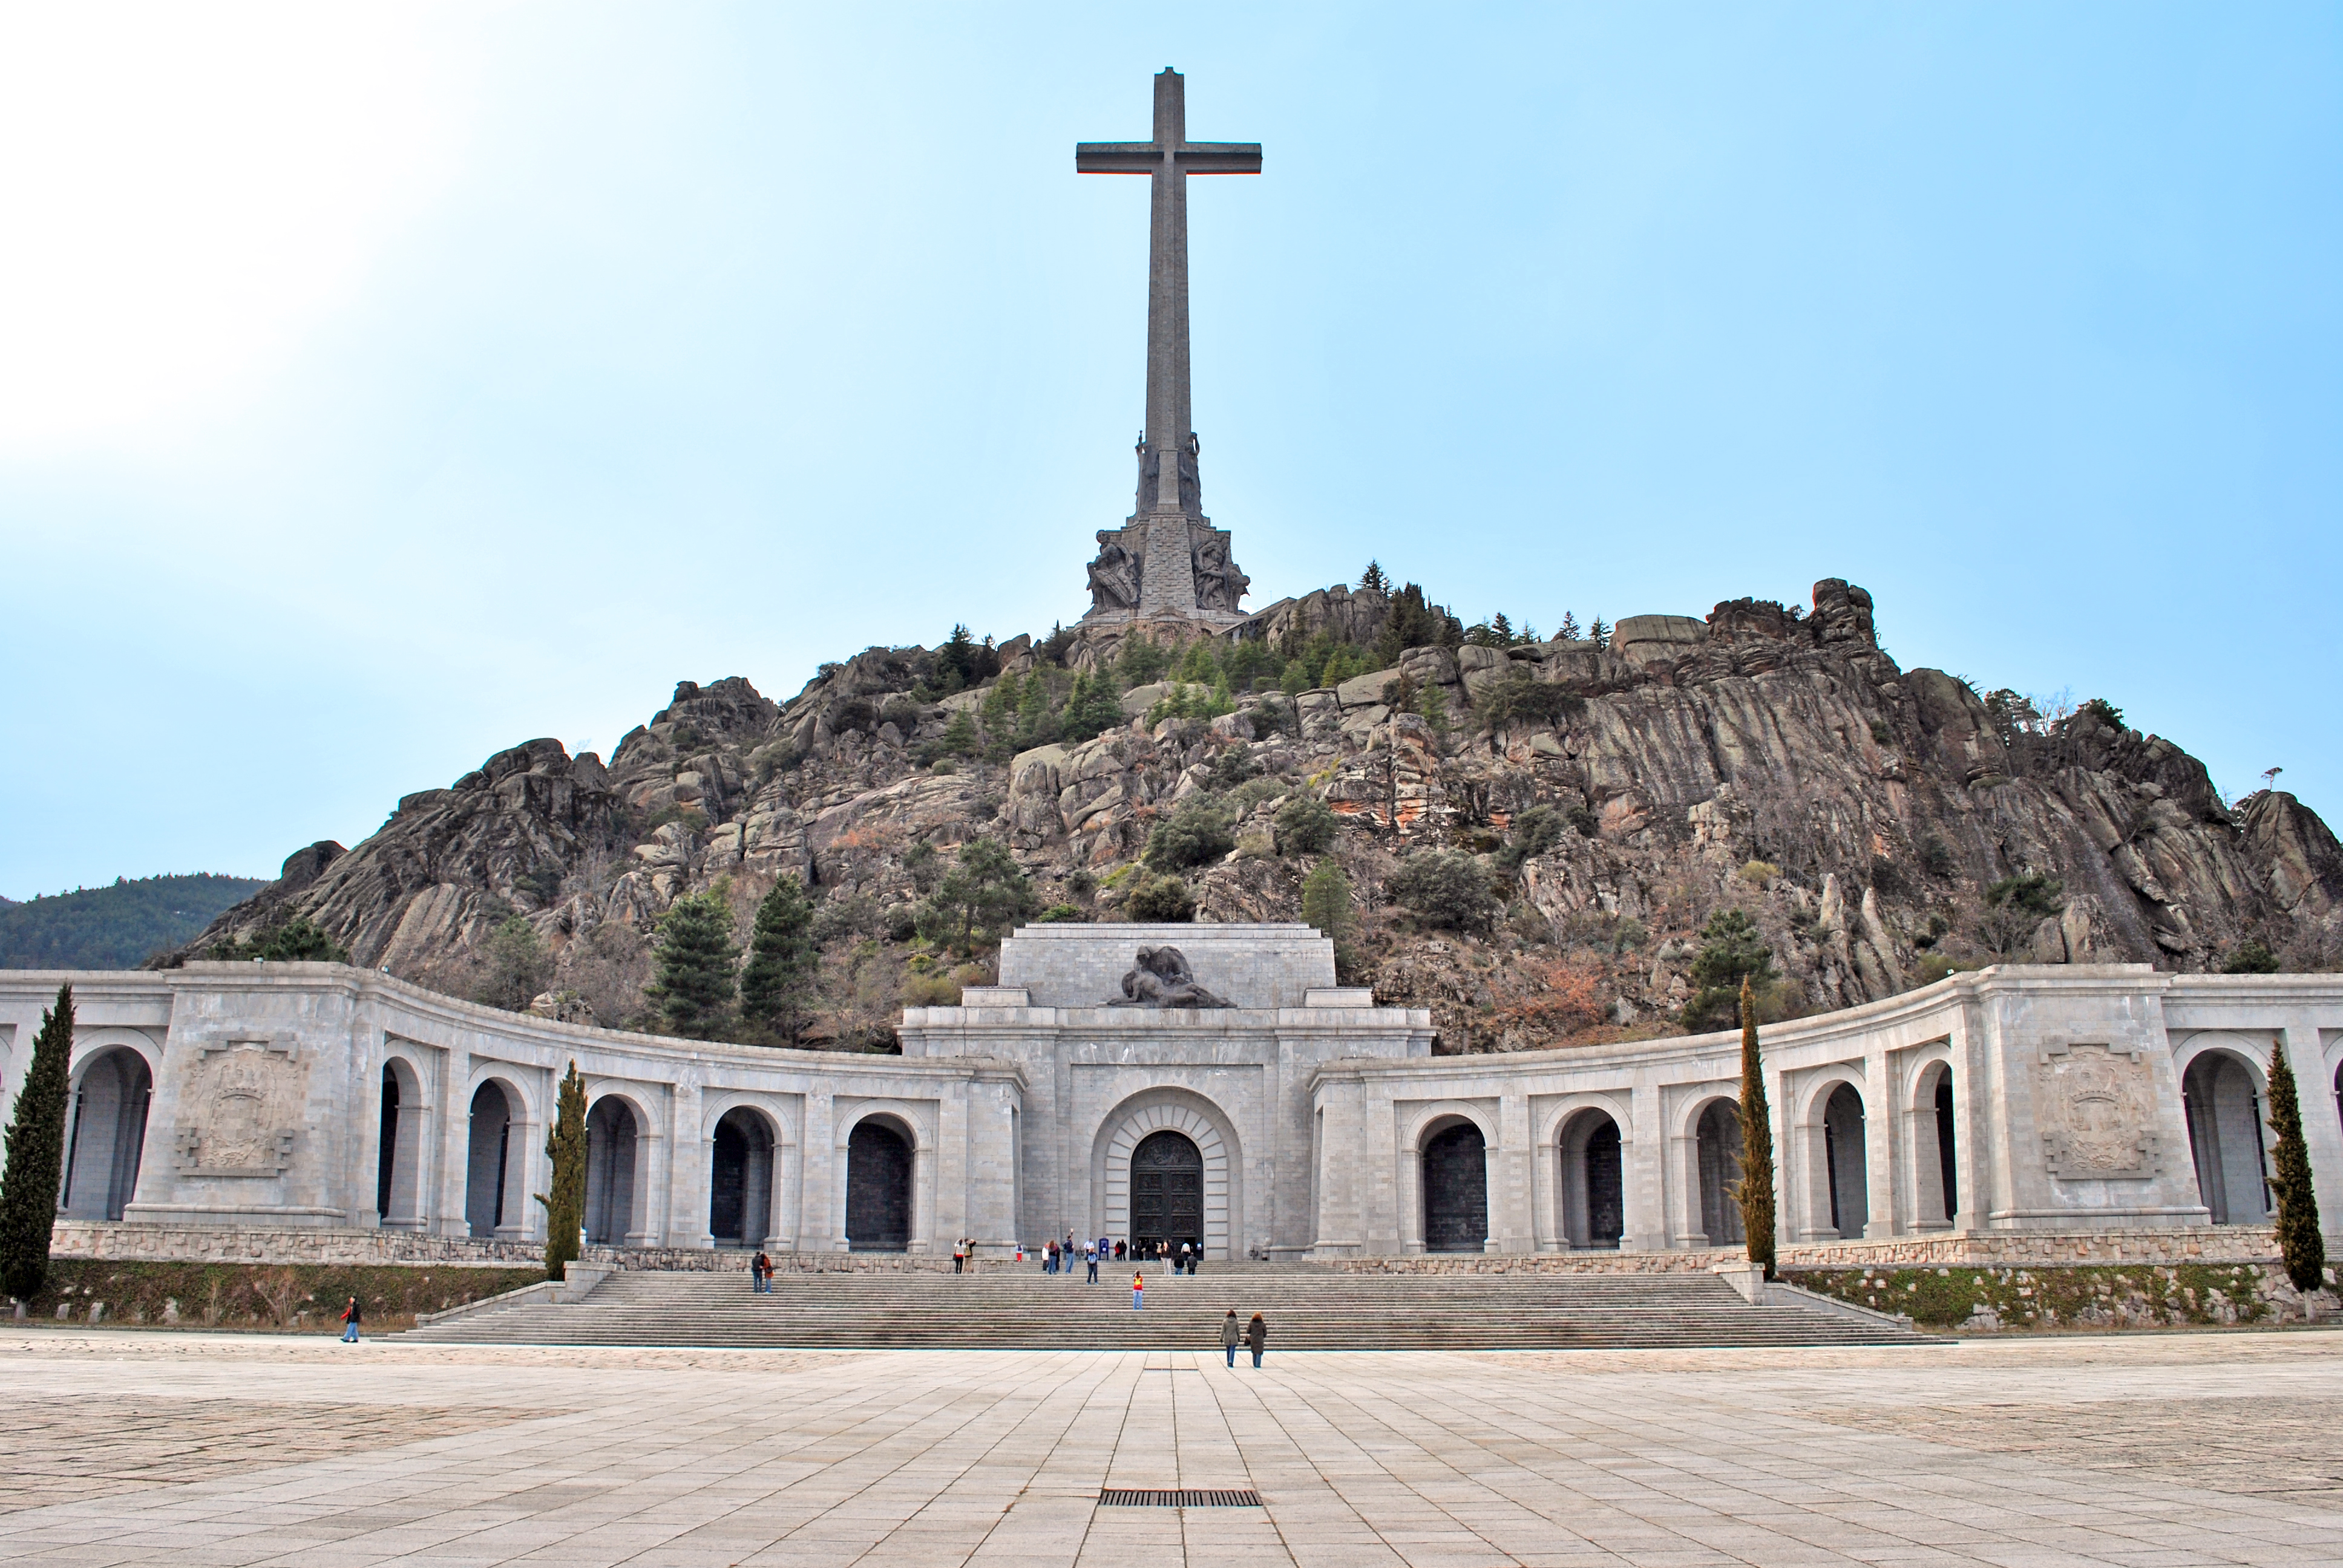 Franco's remains to finally leave Spain's Valley of the Fallen, Spain